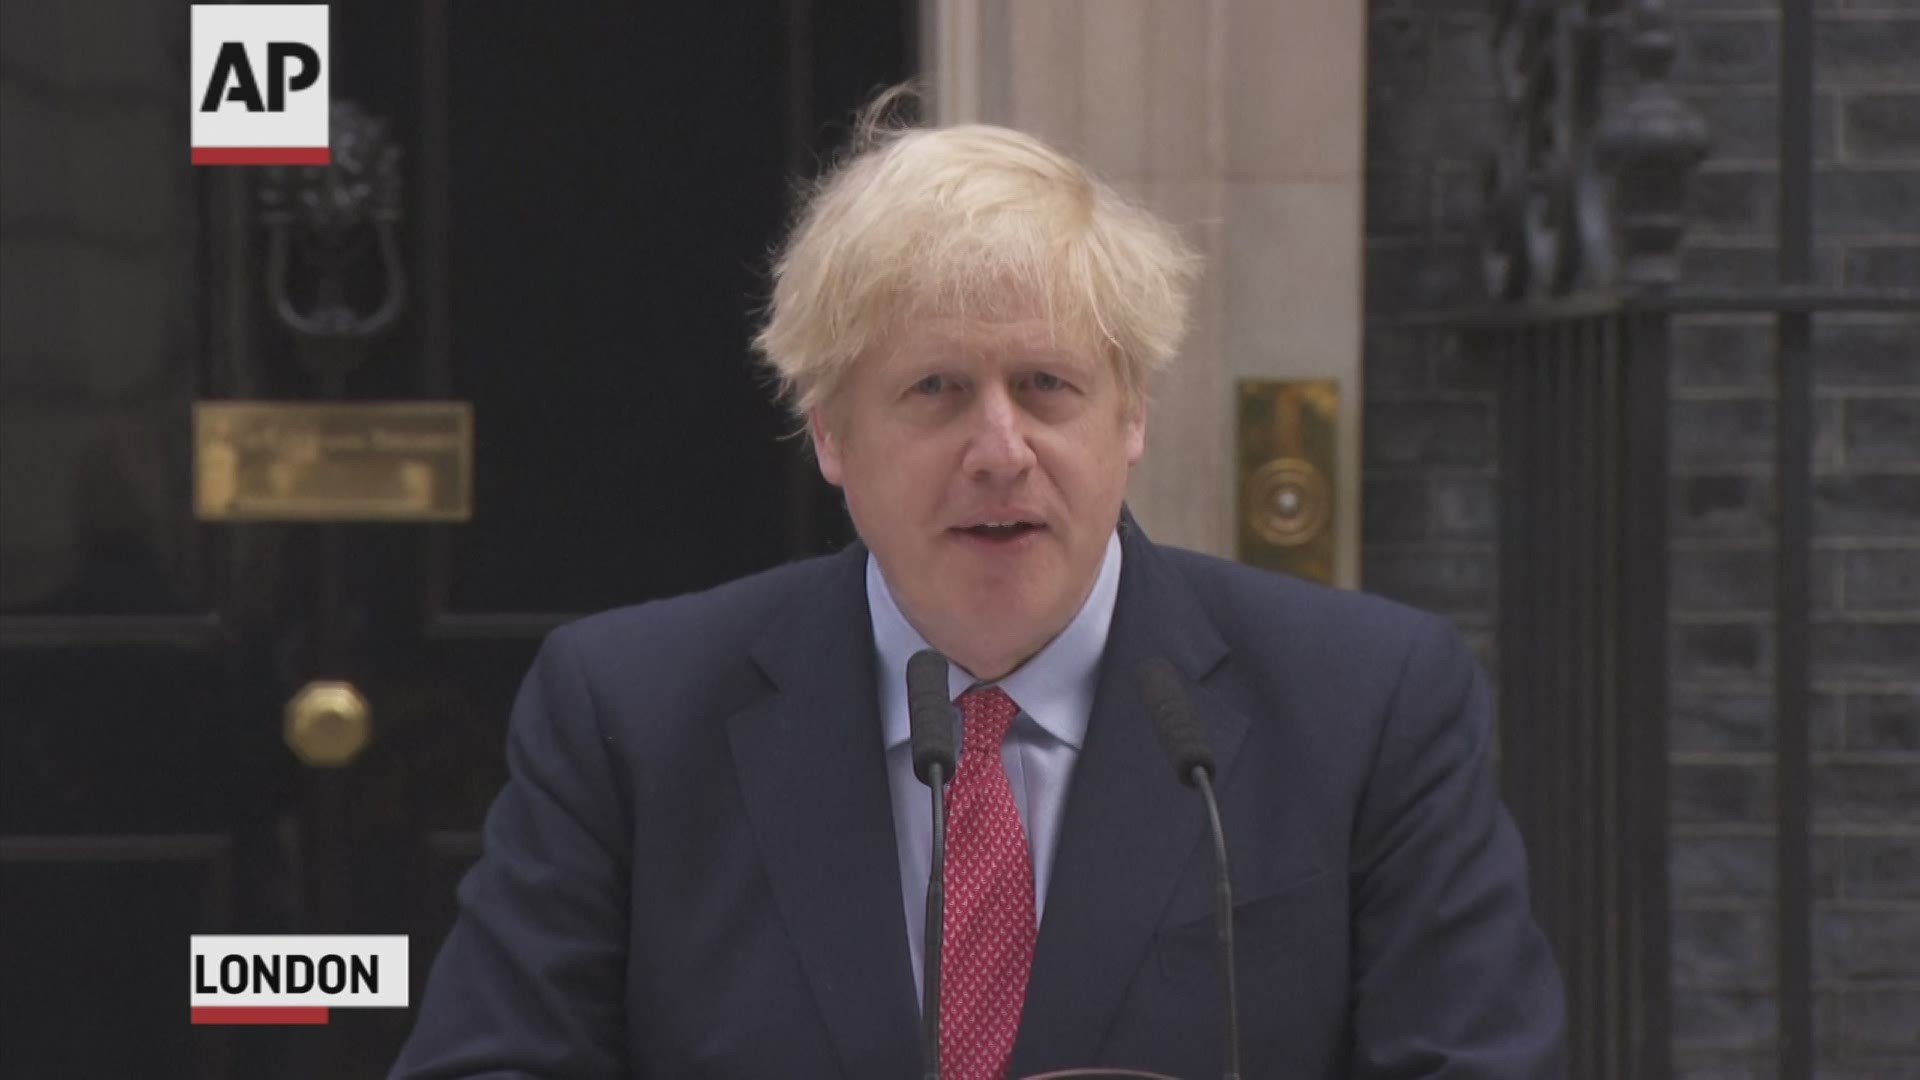 British Prime Minister Boris Johnson is returning to work after recovering from a coronavirus infection that put him in intensive care. (Via AP)